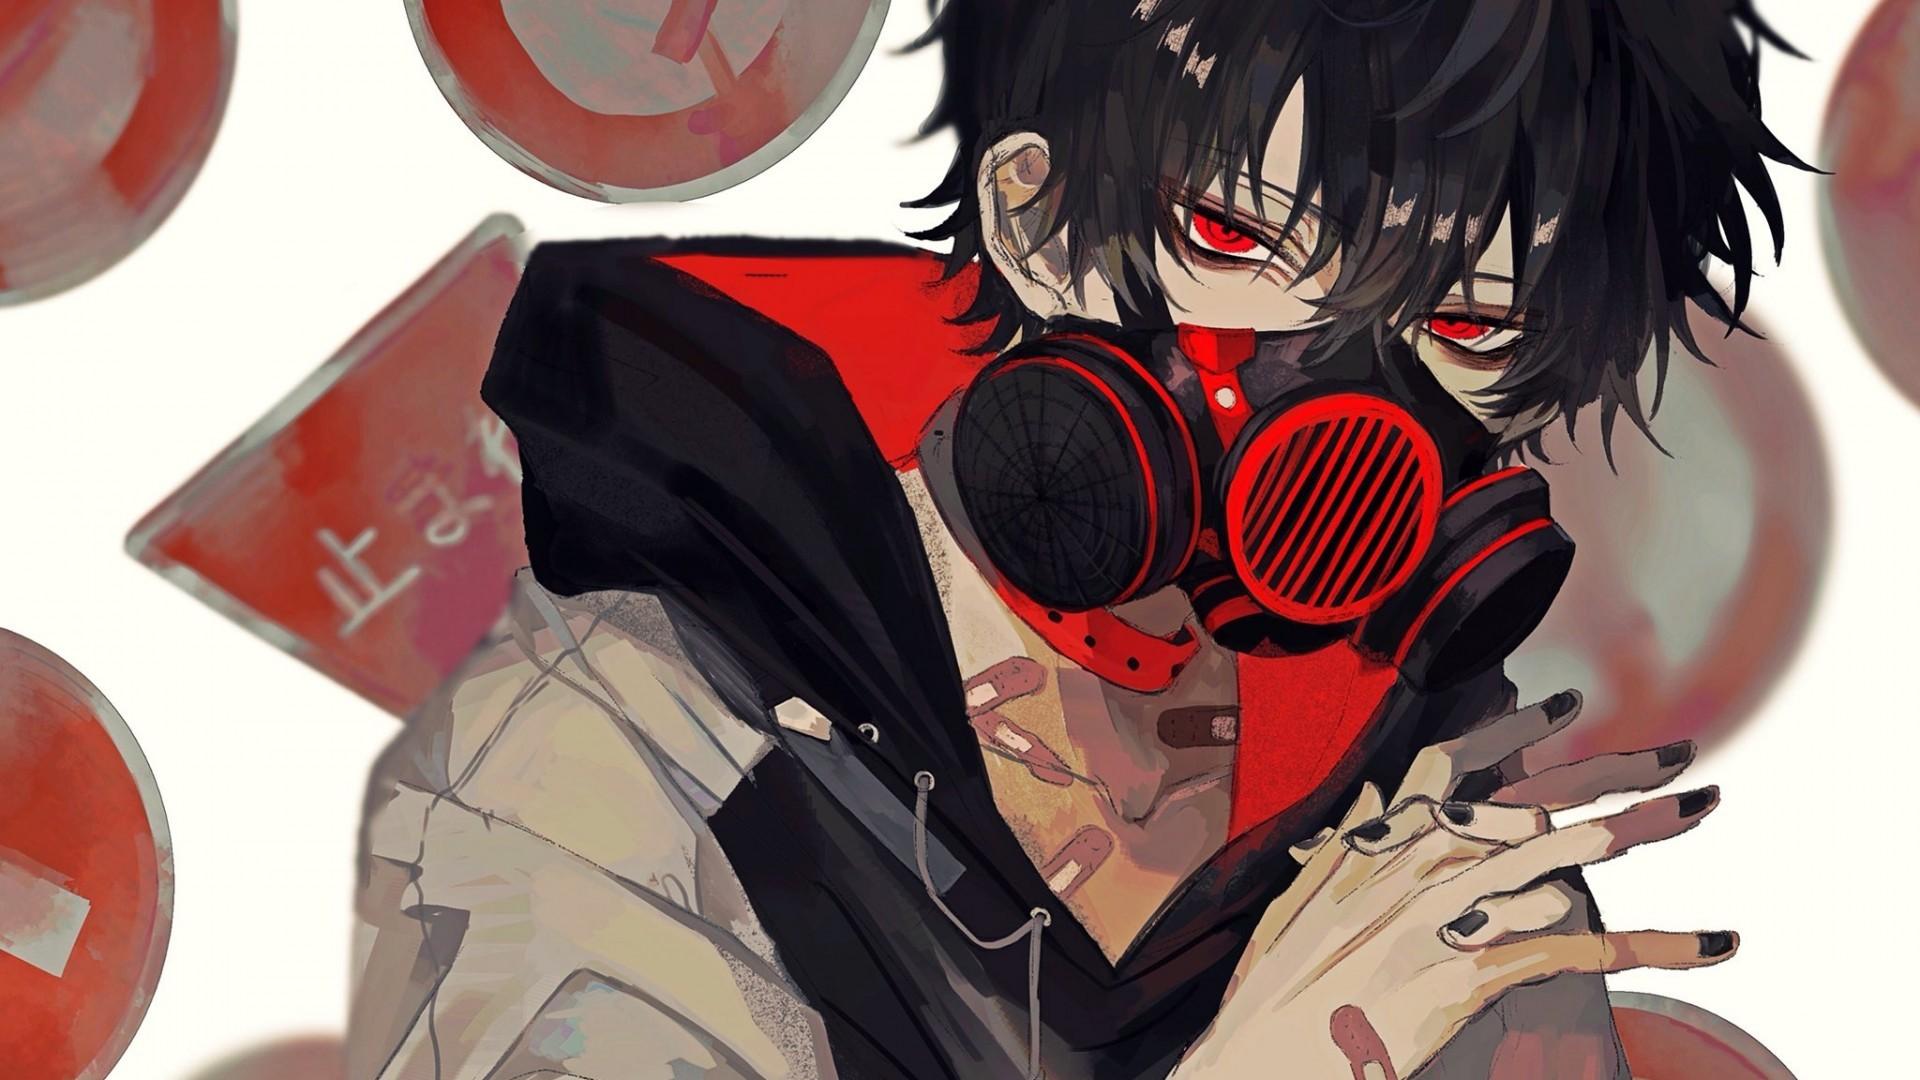 Download 1920x1080 Anime Boy, Gas Mask, Red Eyes, Black Hair, Hoodie Wallpaper for Widescreen